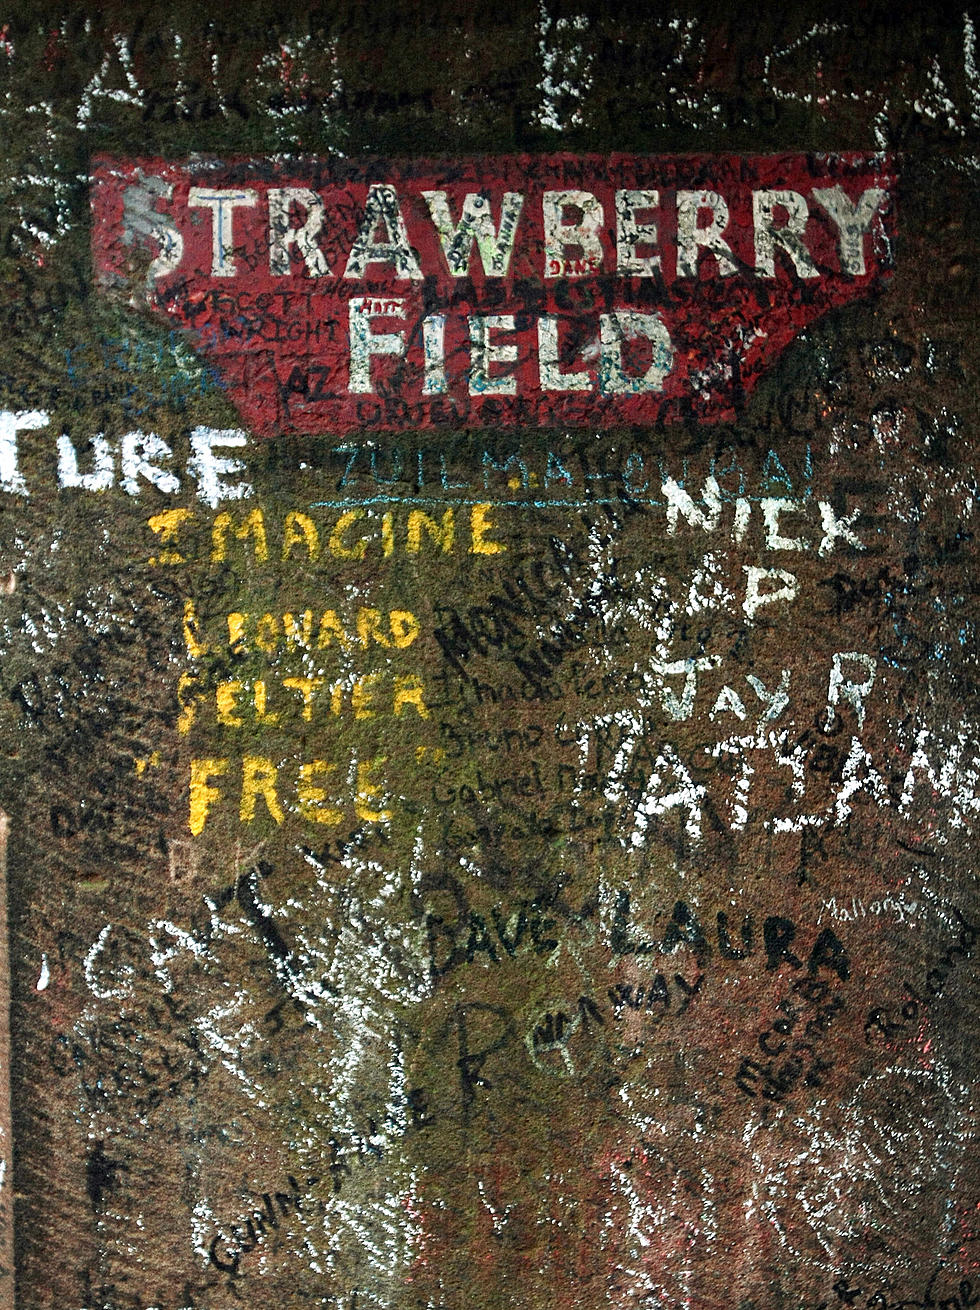 Strawberry Fields Forever: Today in Classic Rock History 10-9-12